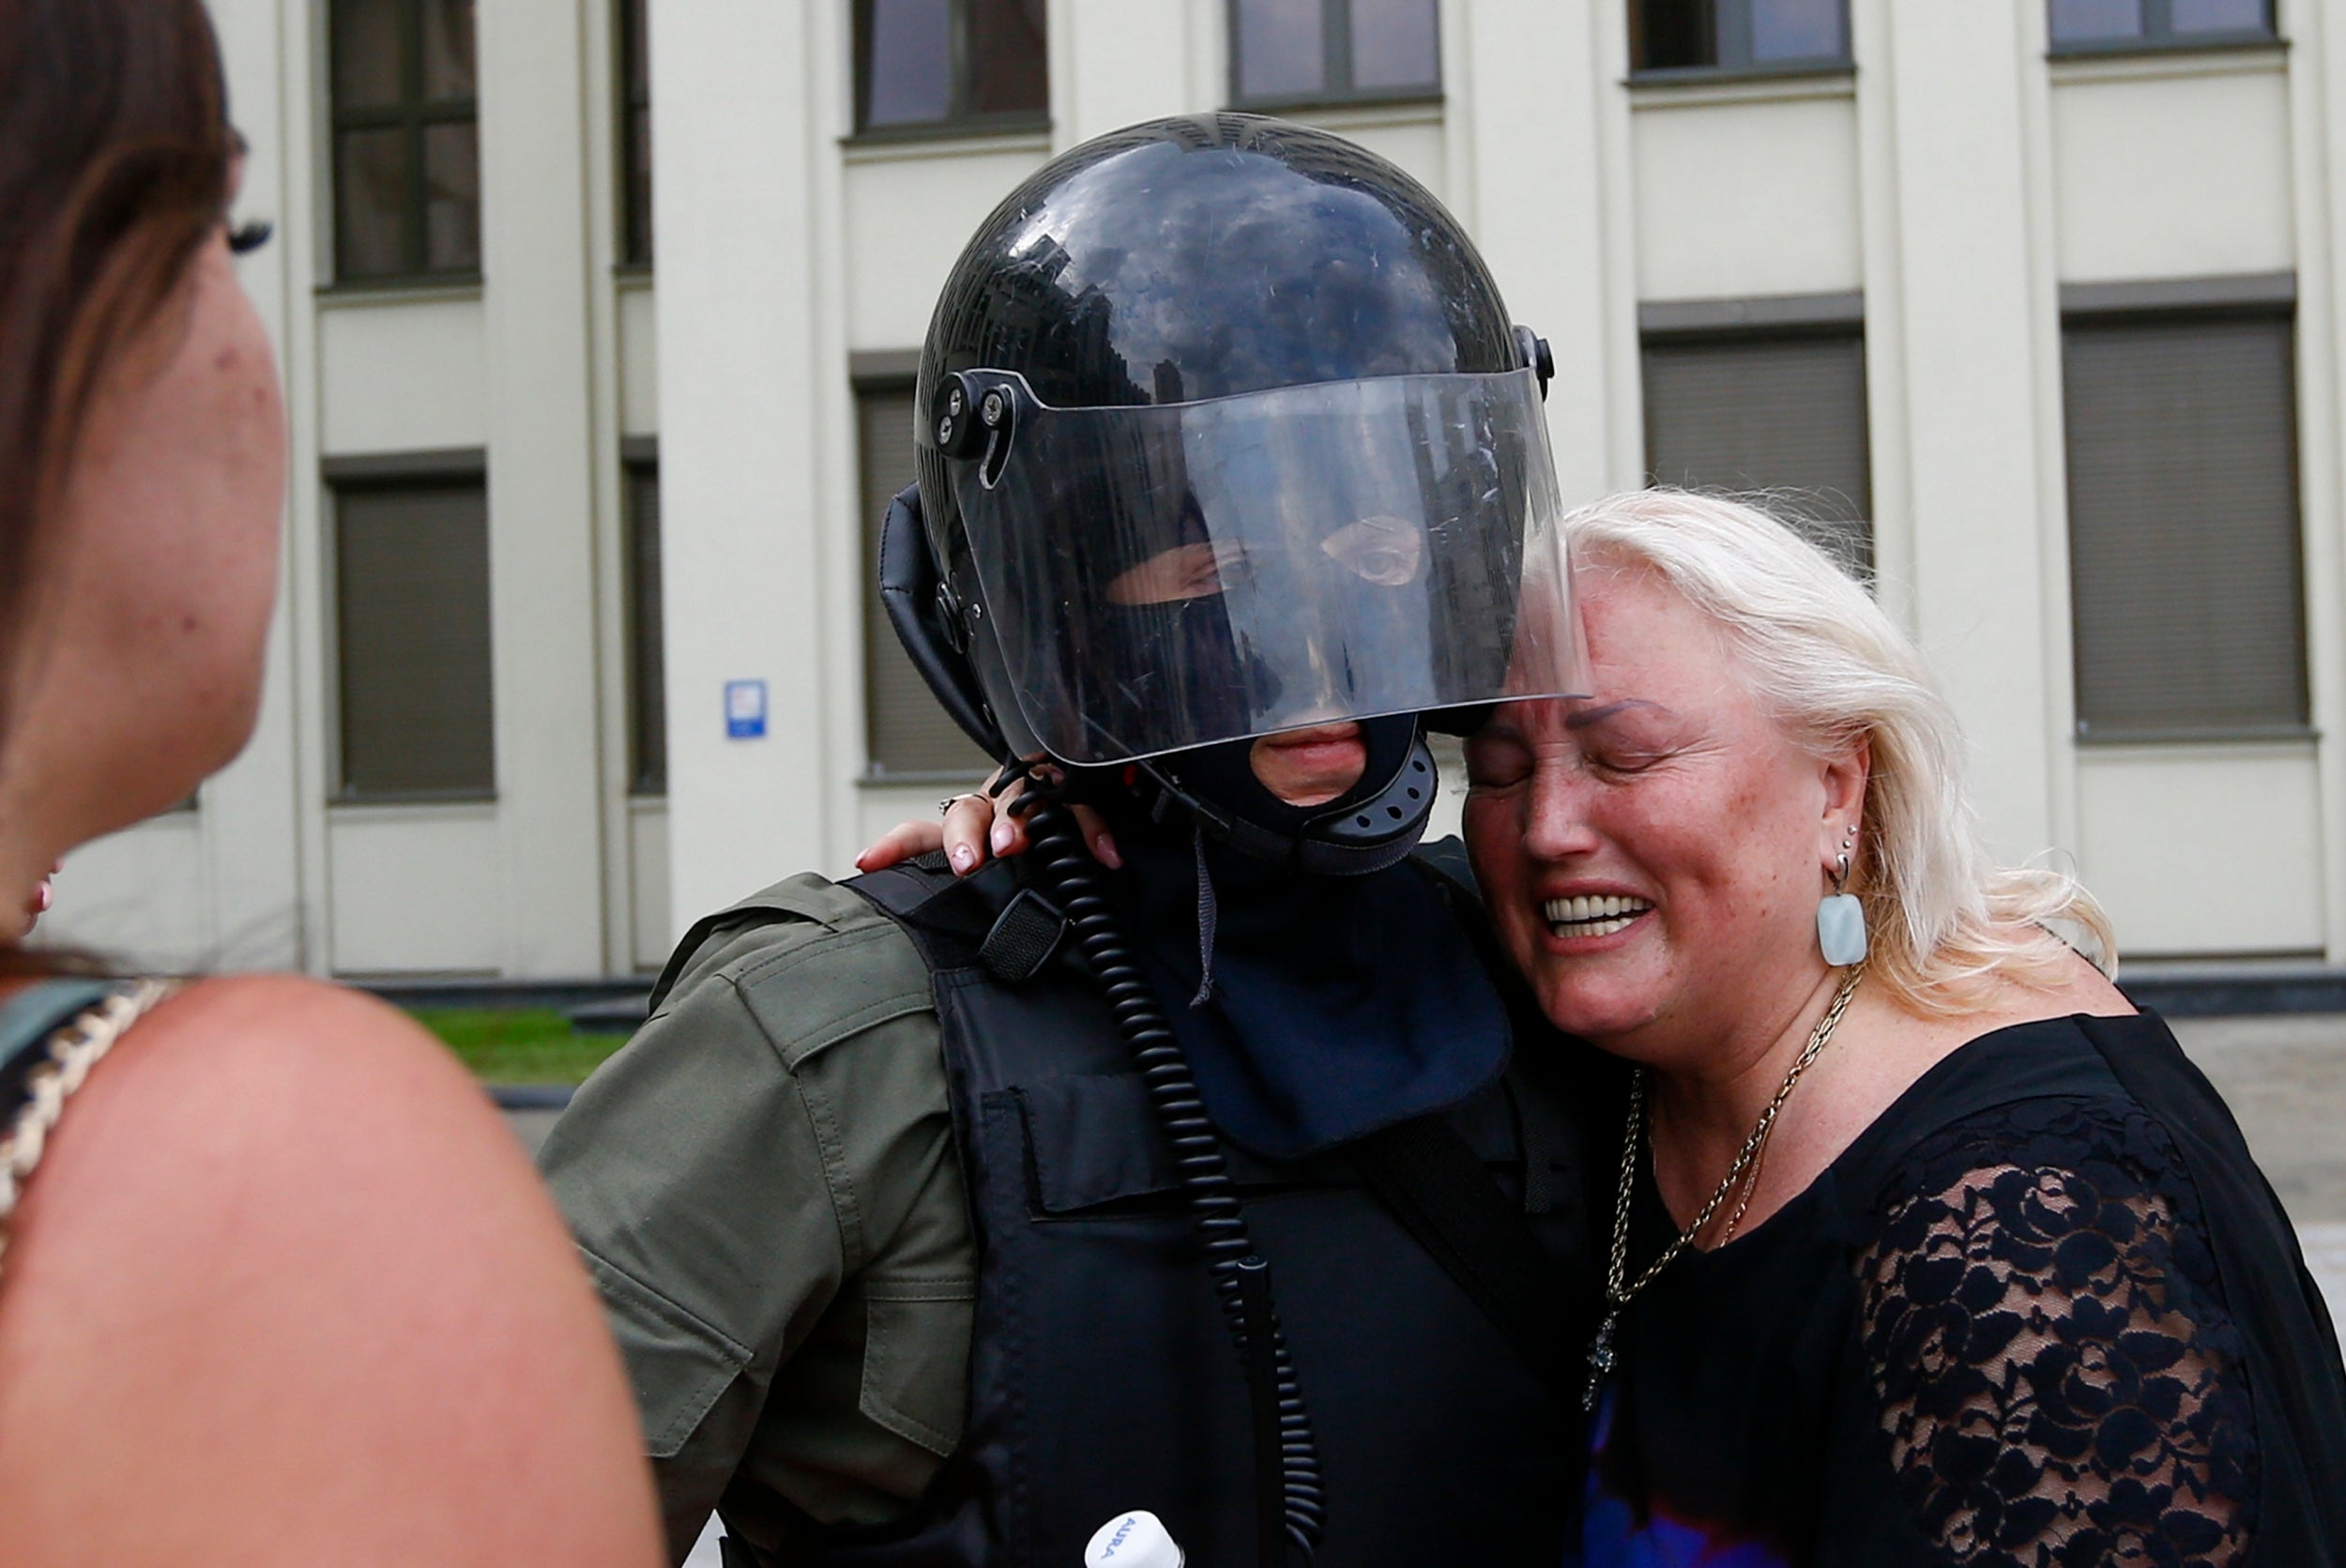 A woman breaks down as she embraces a soldier guarding the Belarusian government building in Minsk on 14 August 2020